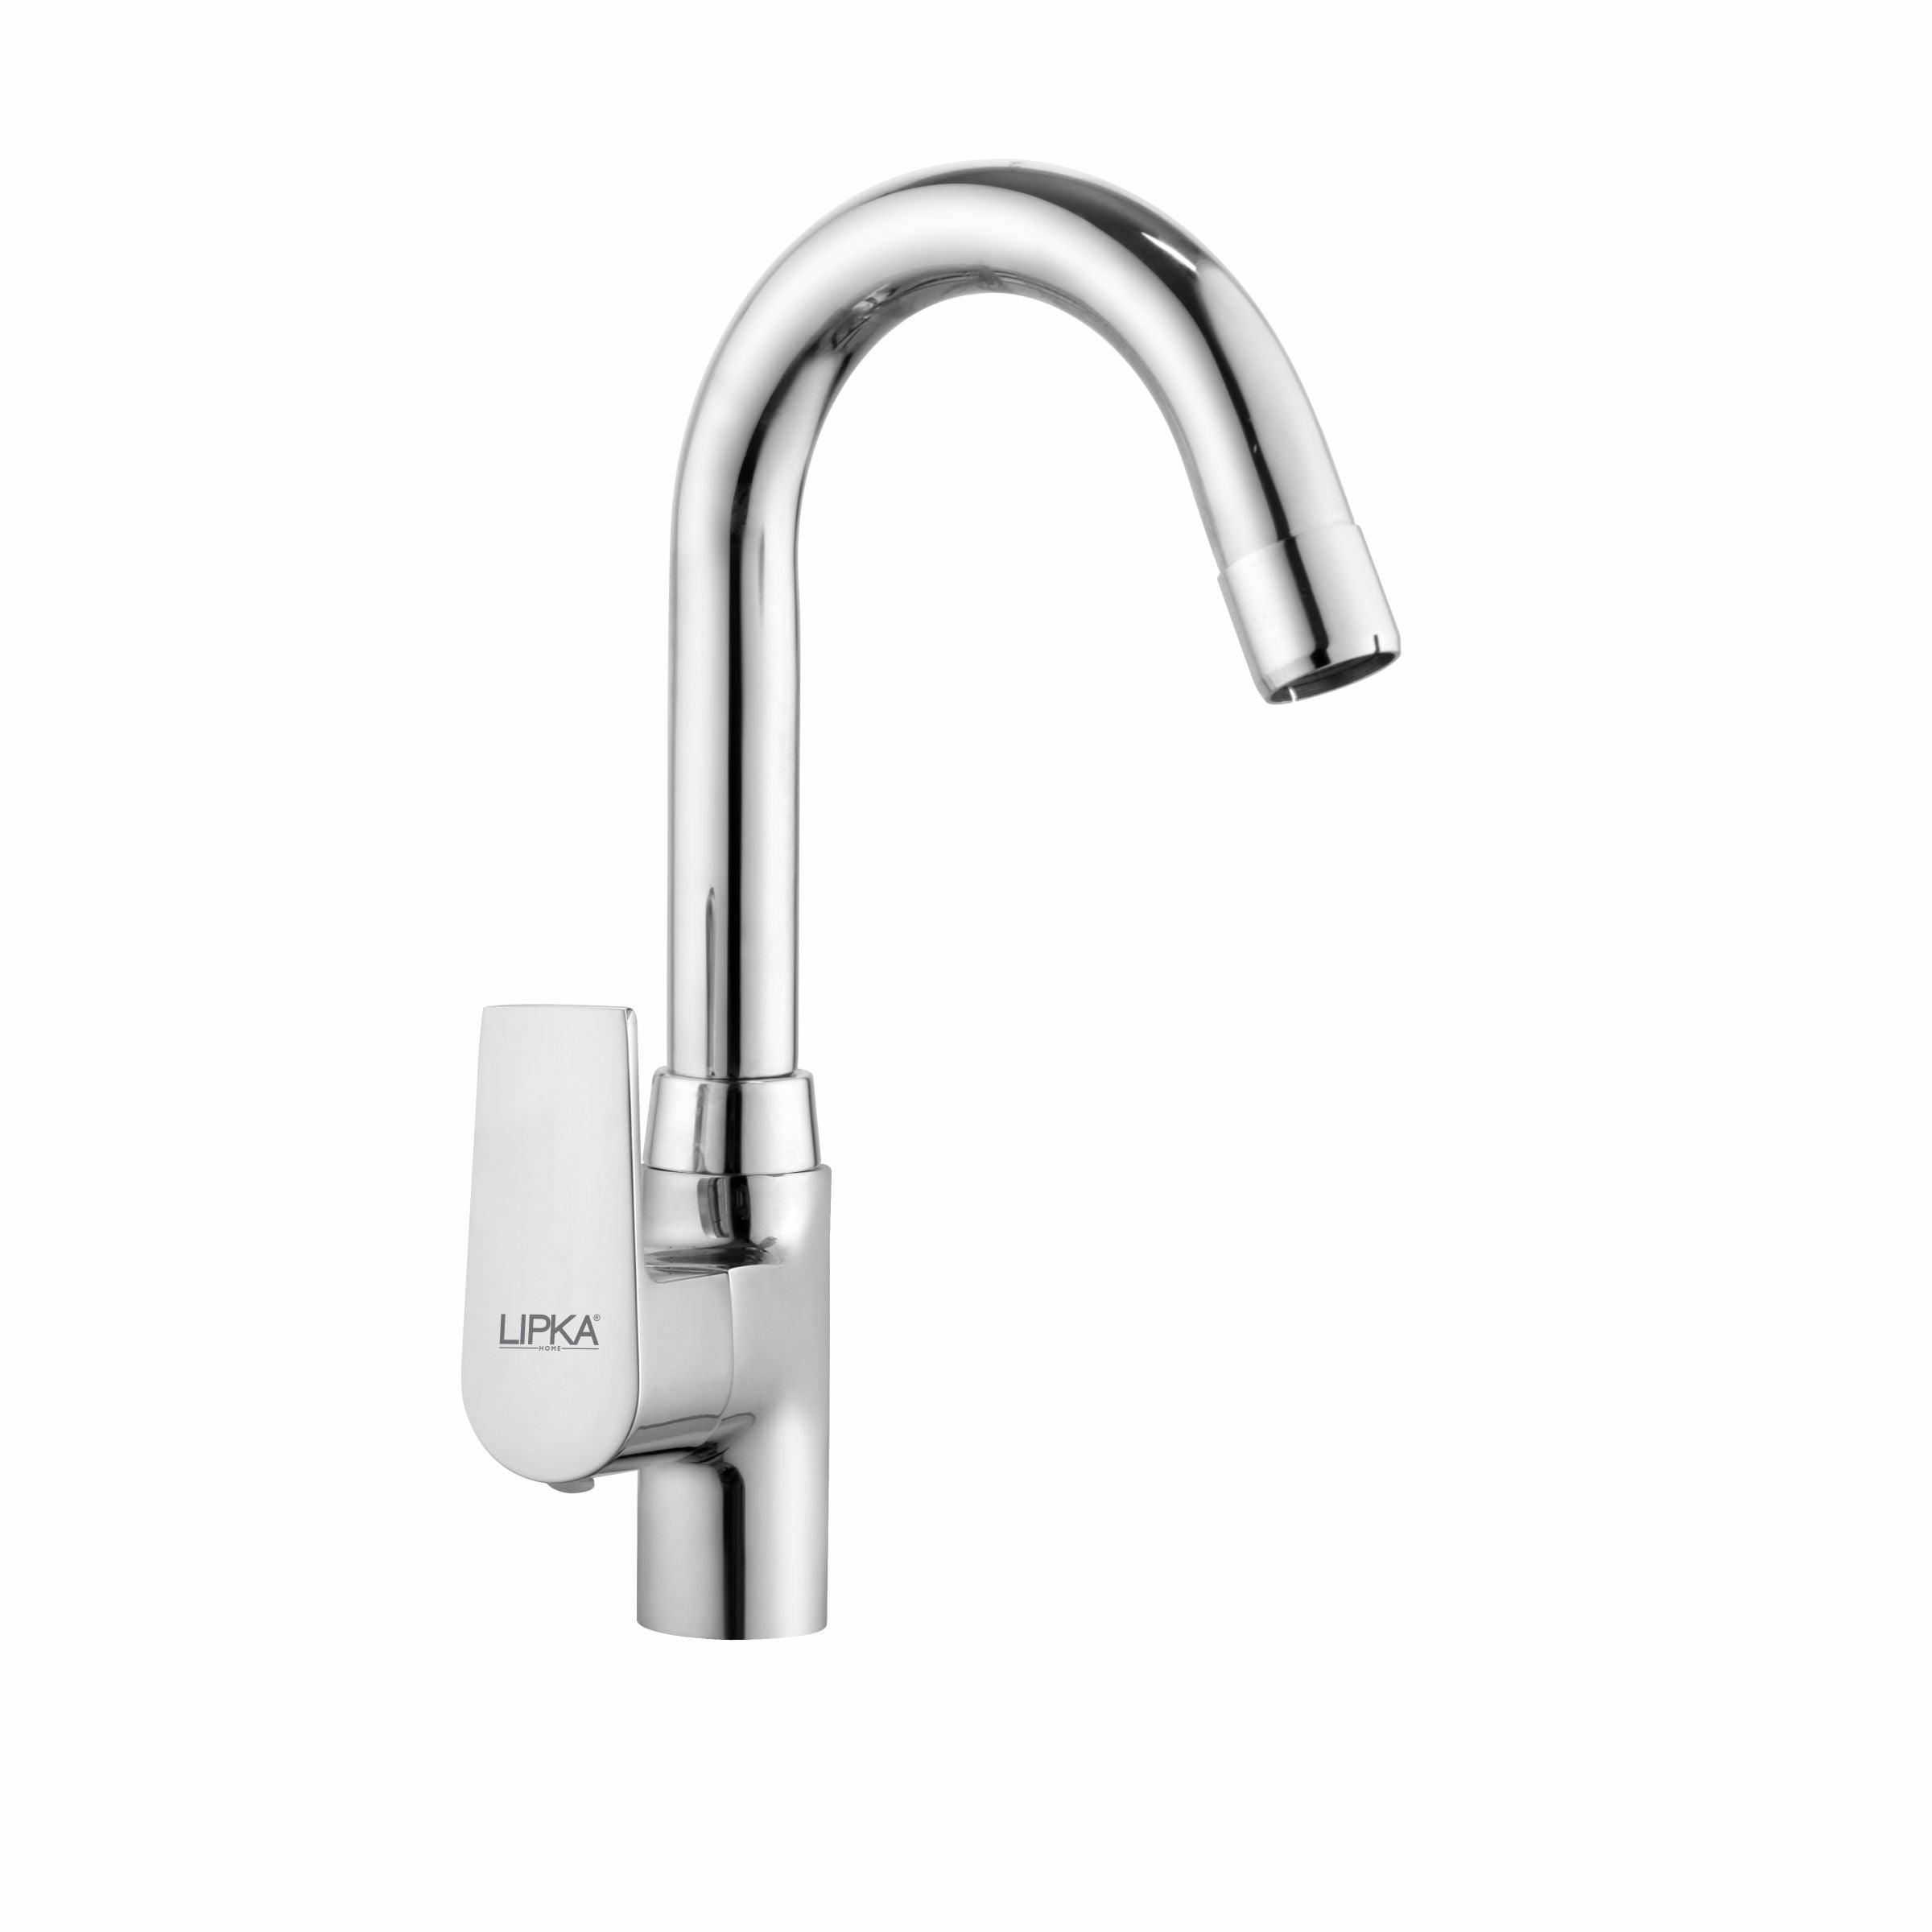 Victory Swan Neck Brass Faucet with Round Swivel Spout (12 Inches) - LIPKA - Lipka Home